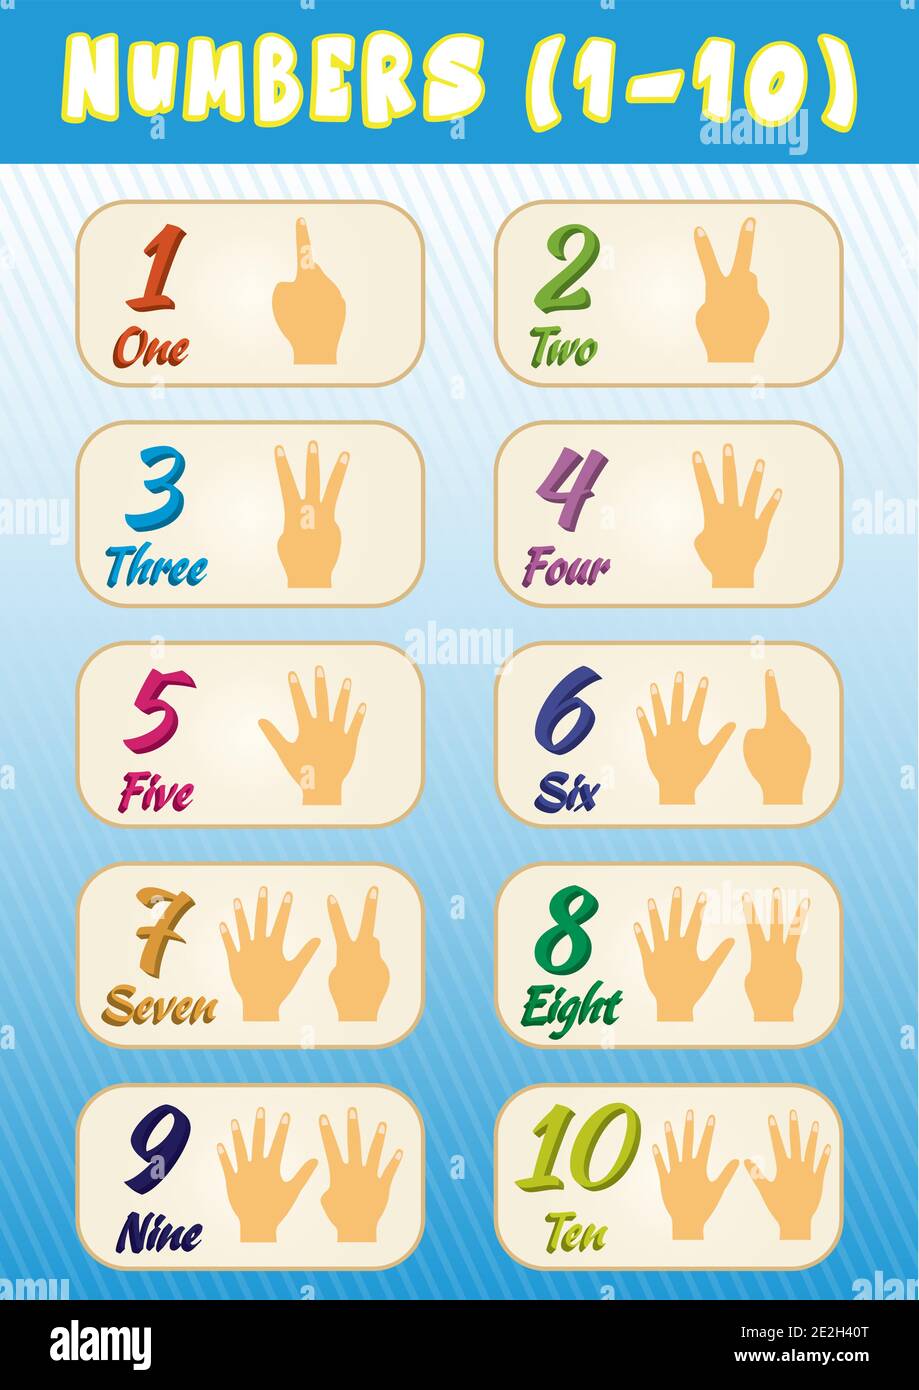 1 kids hand showing number one sign Royalty Free Vector